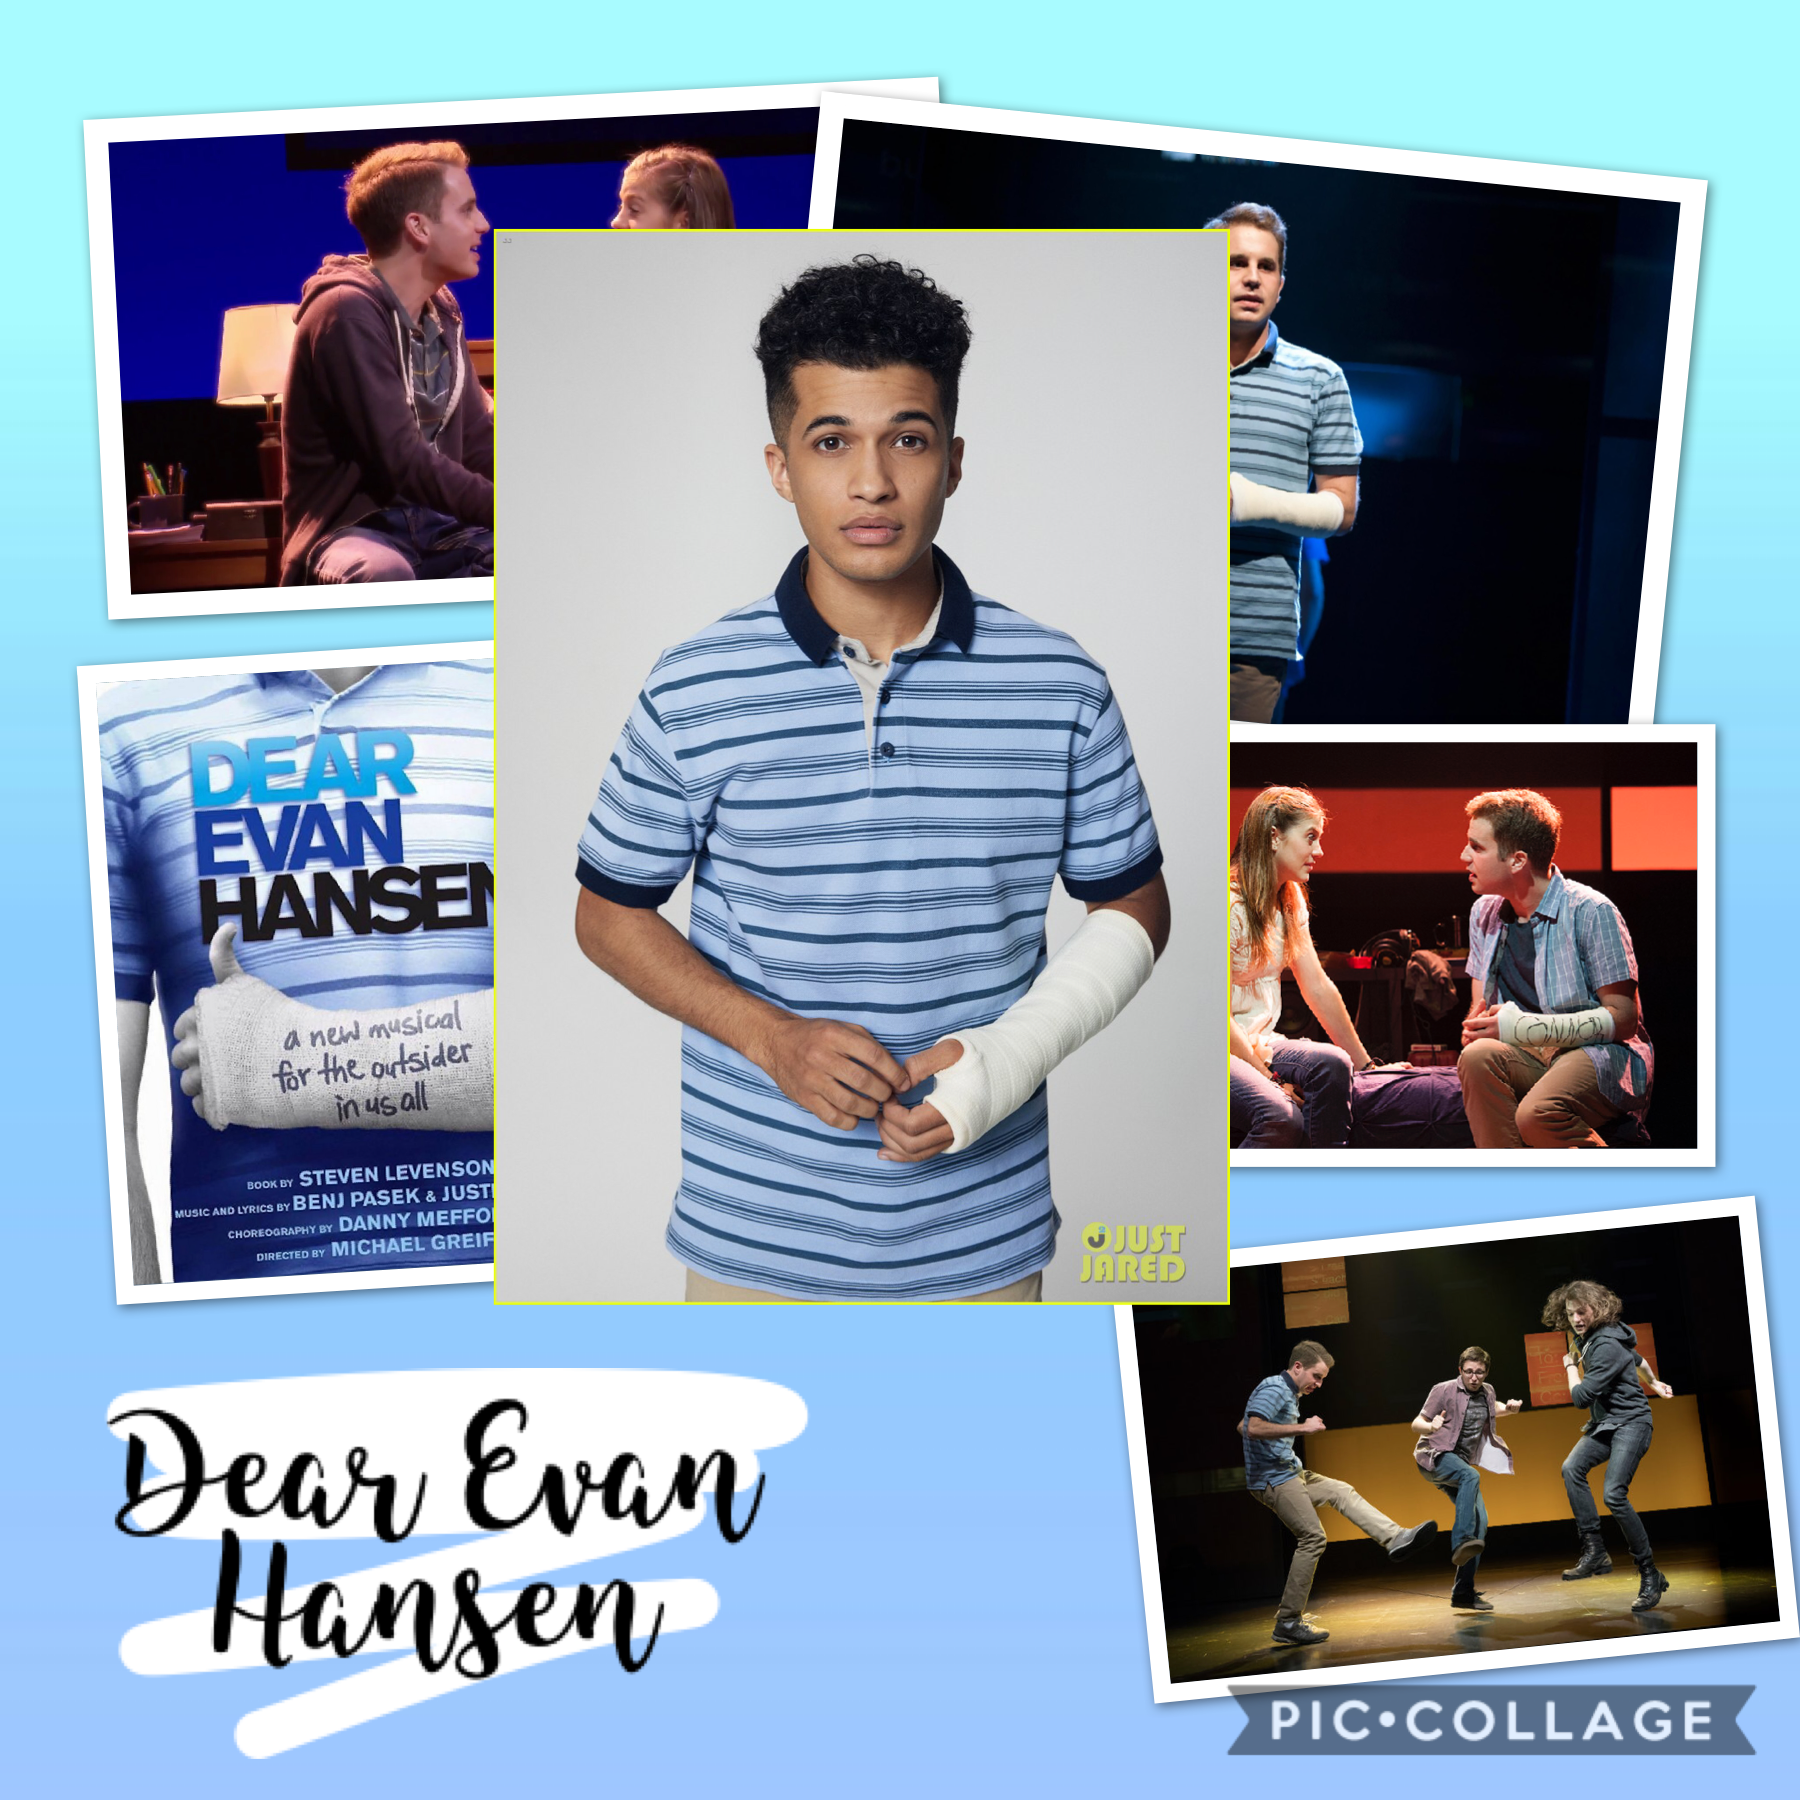 Jordan Fisher (Holden form Liv and Maddie) is going to play Evan Hansen on Broadway!!!